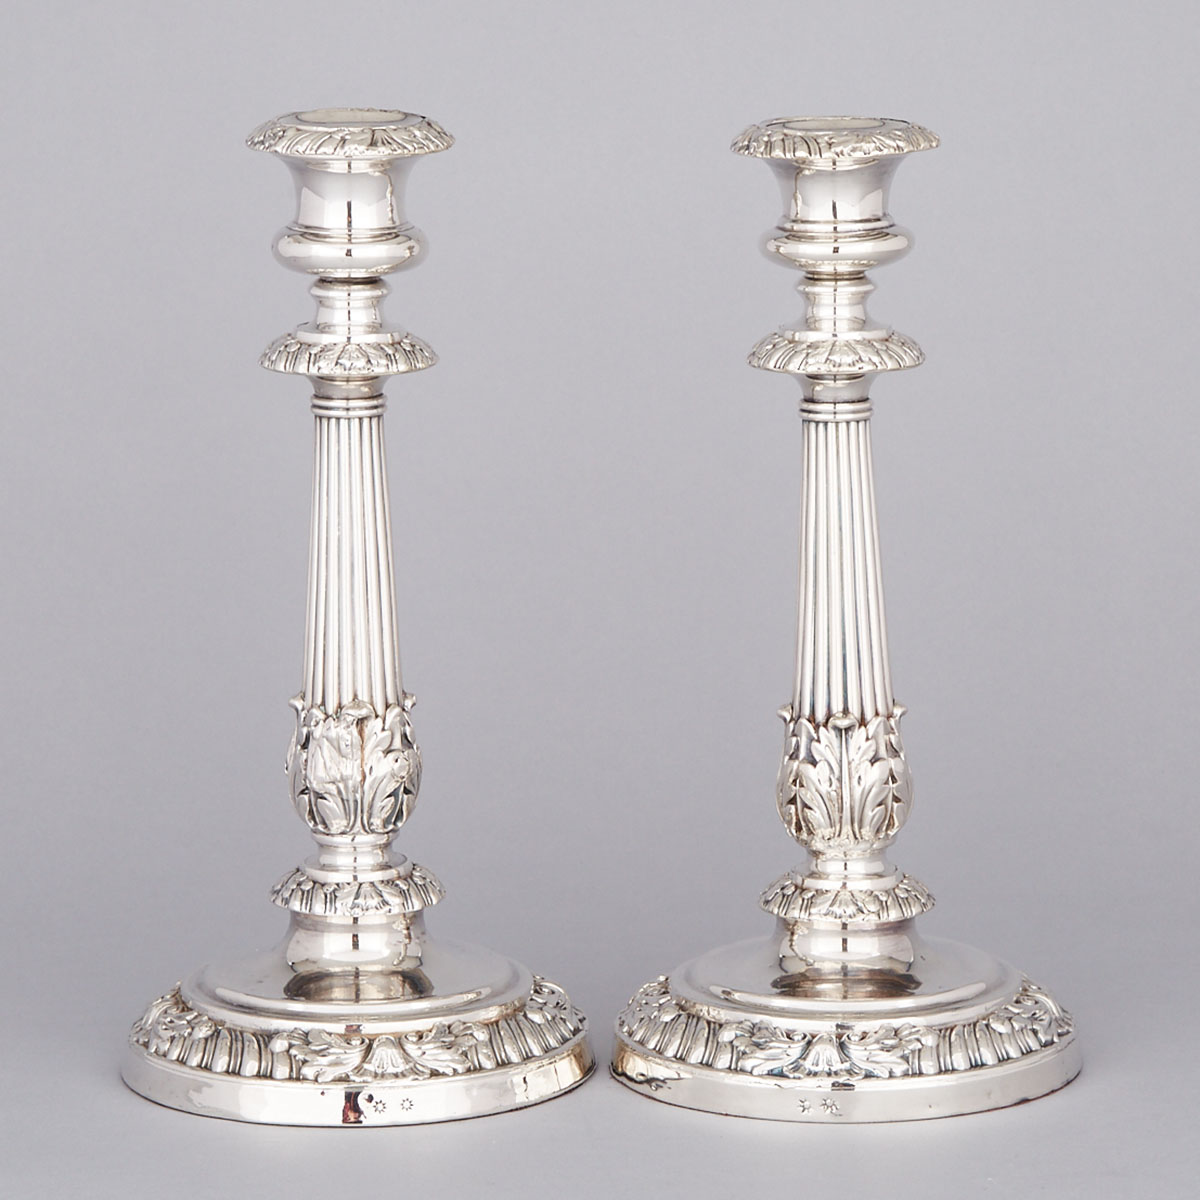 Pair of Old Sheffield Plate Table Candlesticks, Matthew Boulton, c.1820 